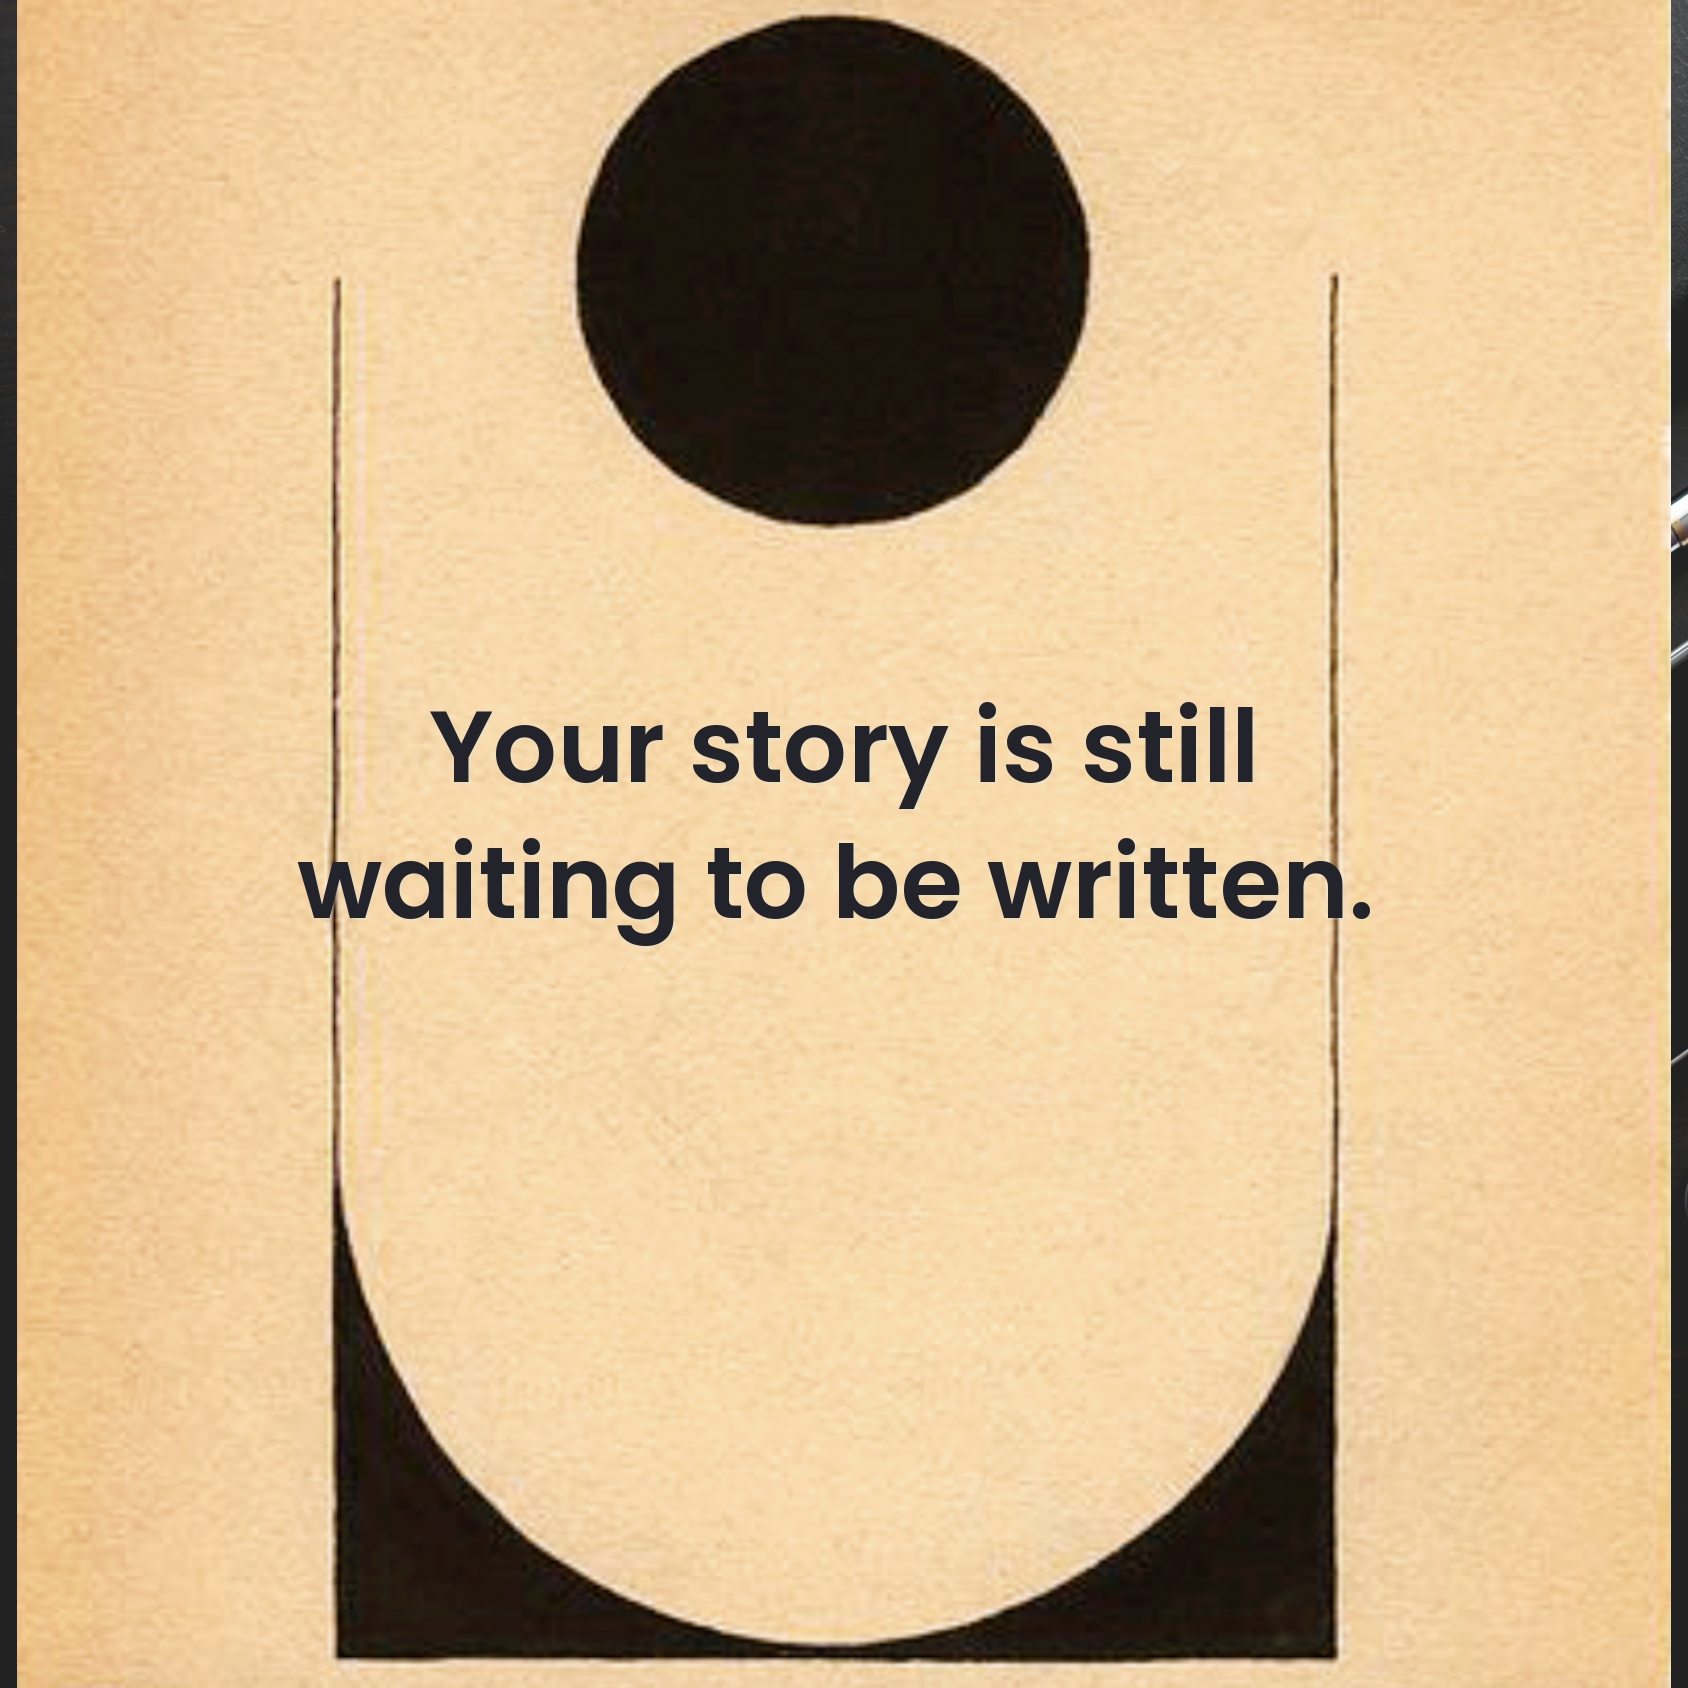 Your story is still |
aiting to be writte |

EJ